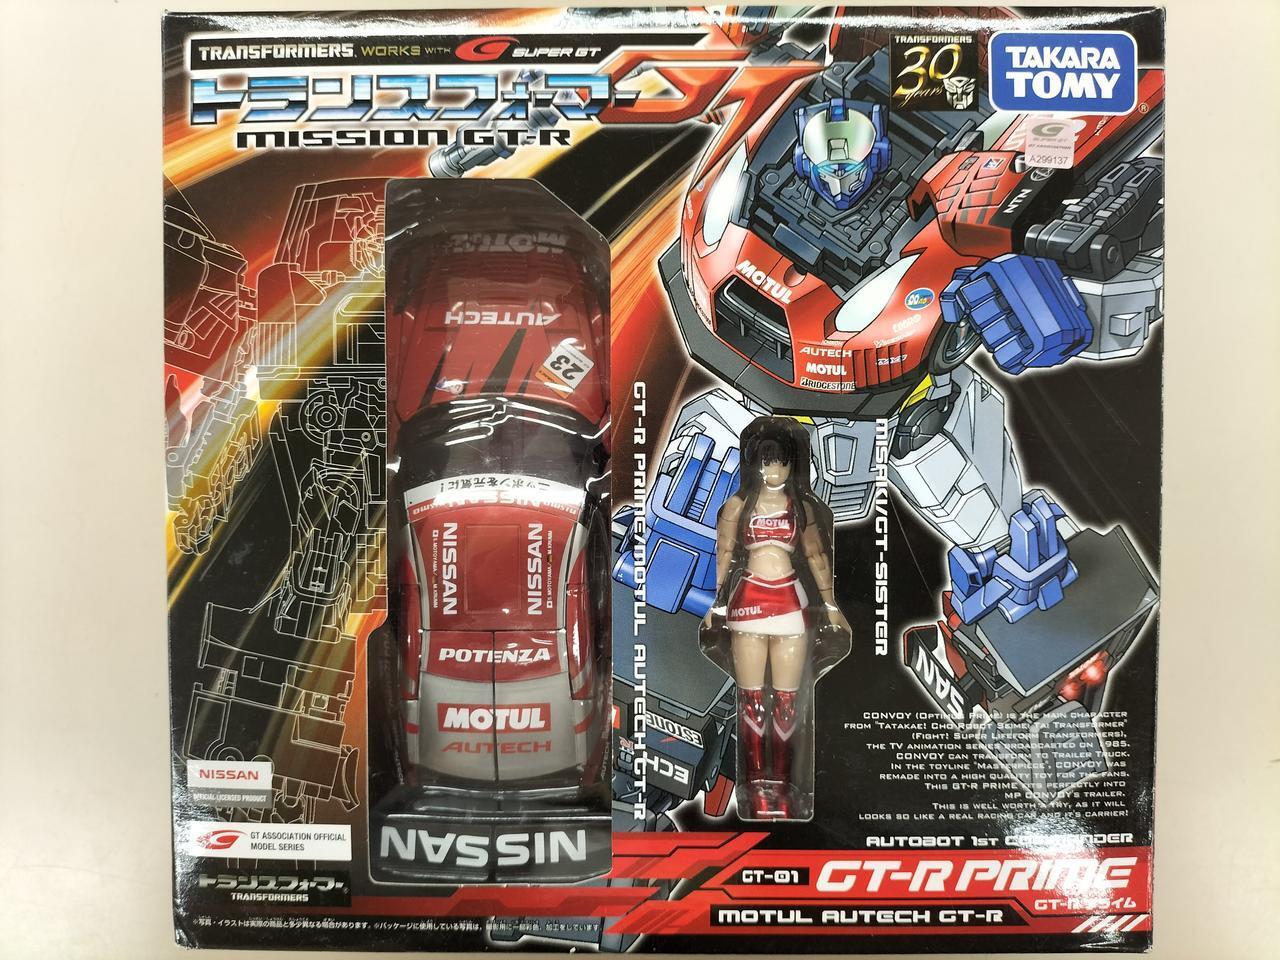 TAKARA TOMY Transformers MISSION GT-R GT-01 GT-R Prime Action Figure